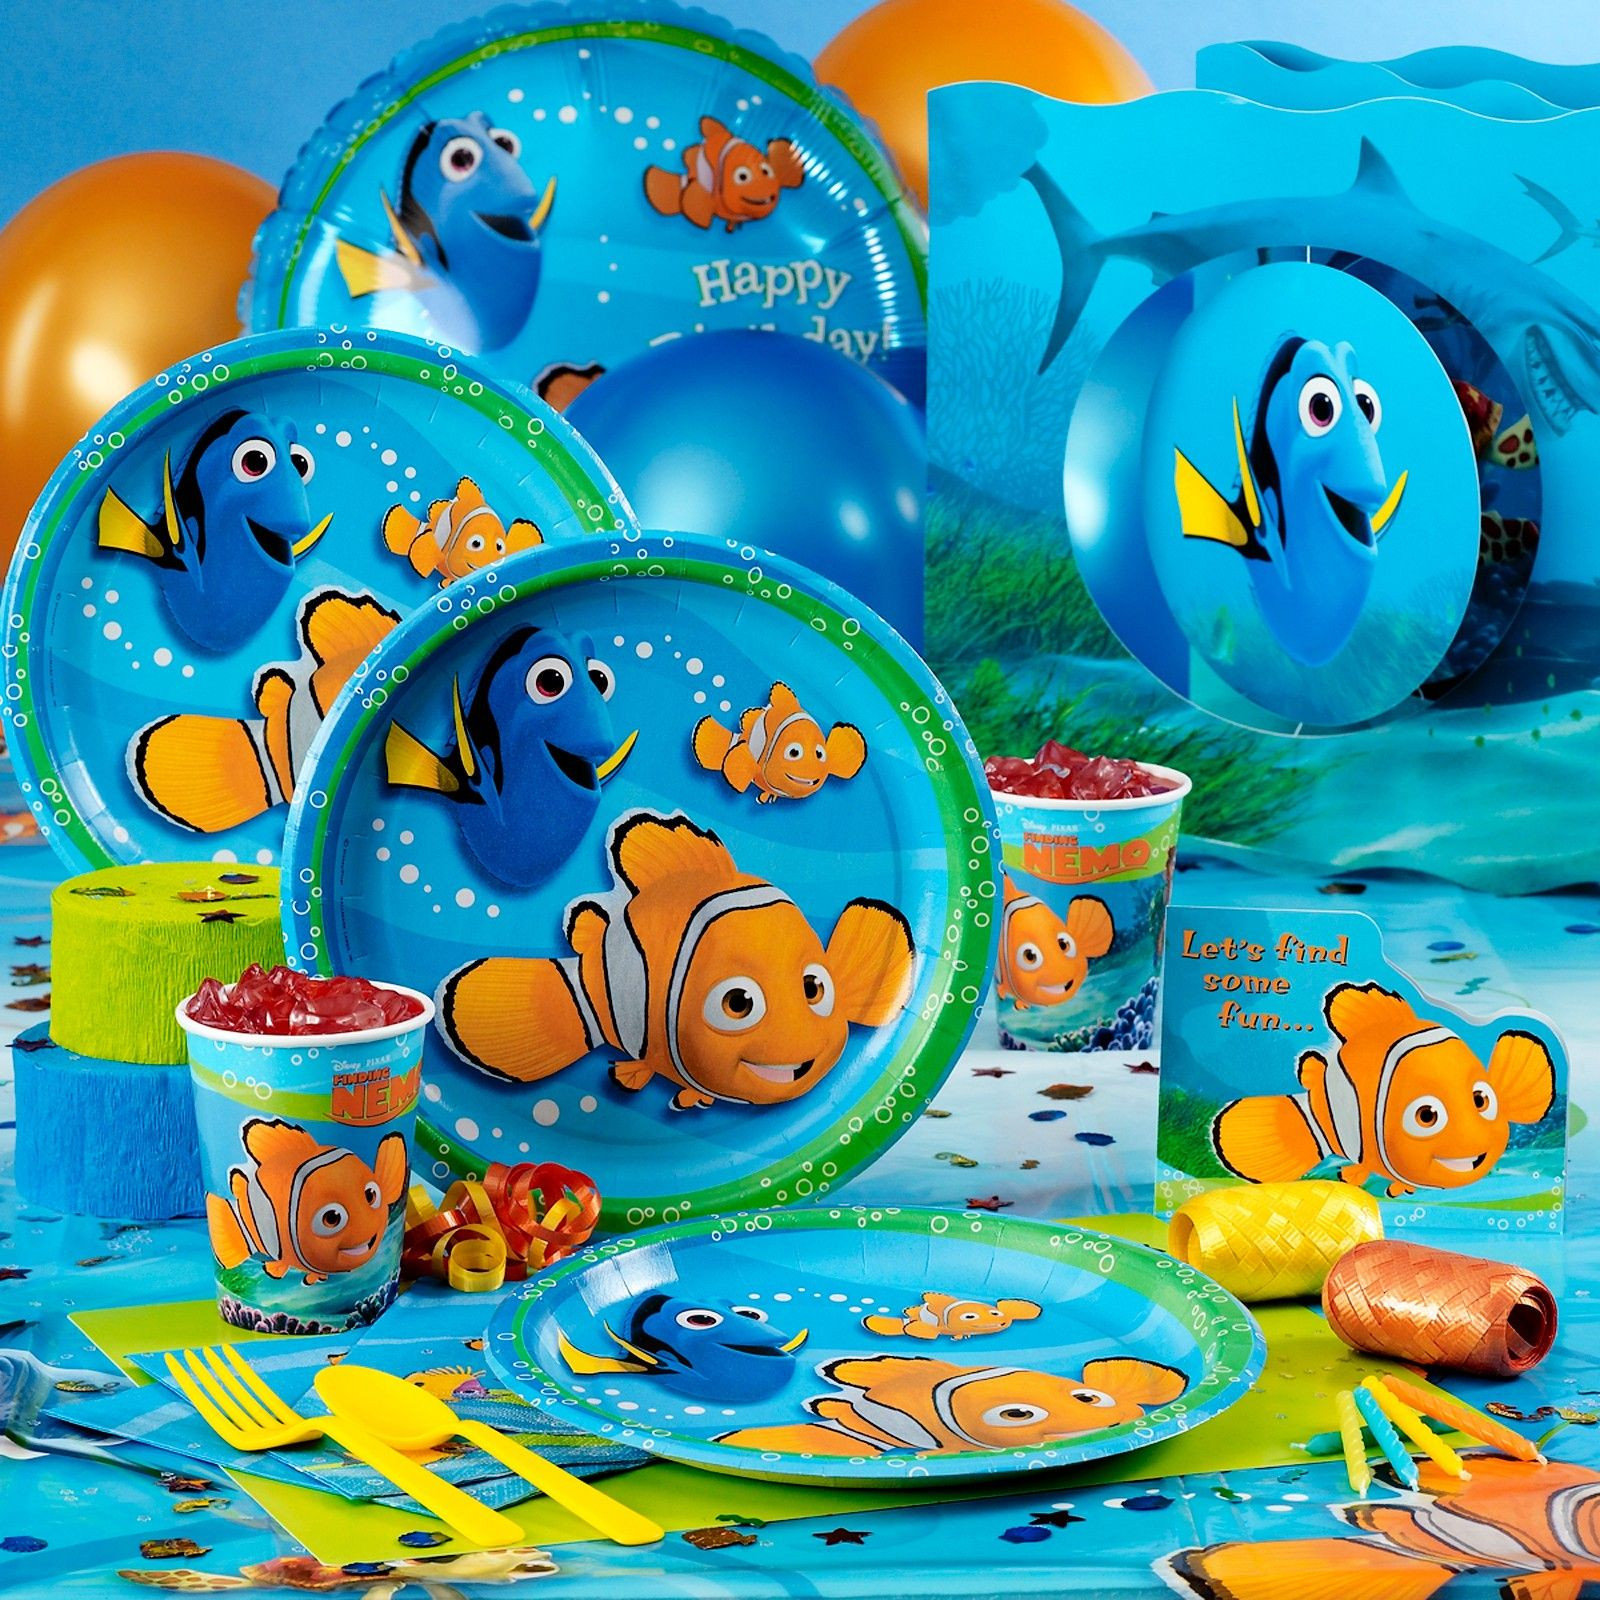 Finding Nemo Birthday Decorations
 Finding Nemo Deluxe Party Pack